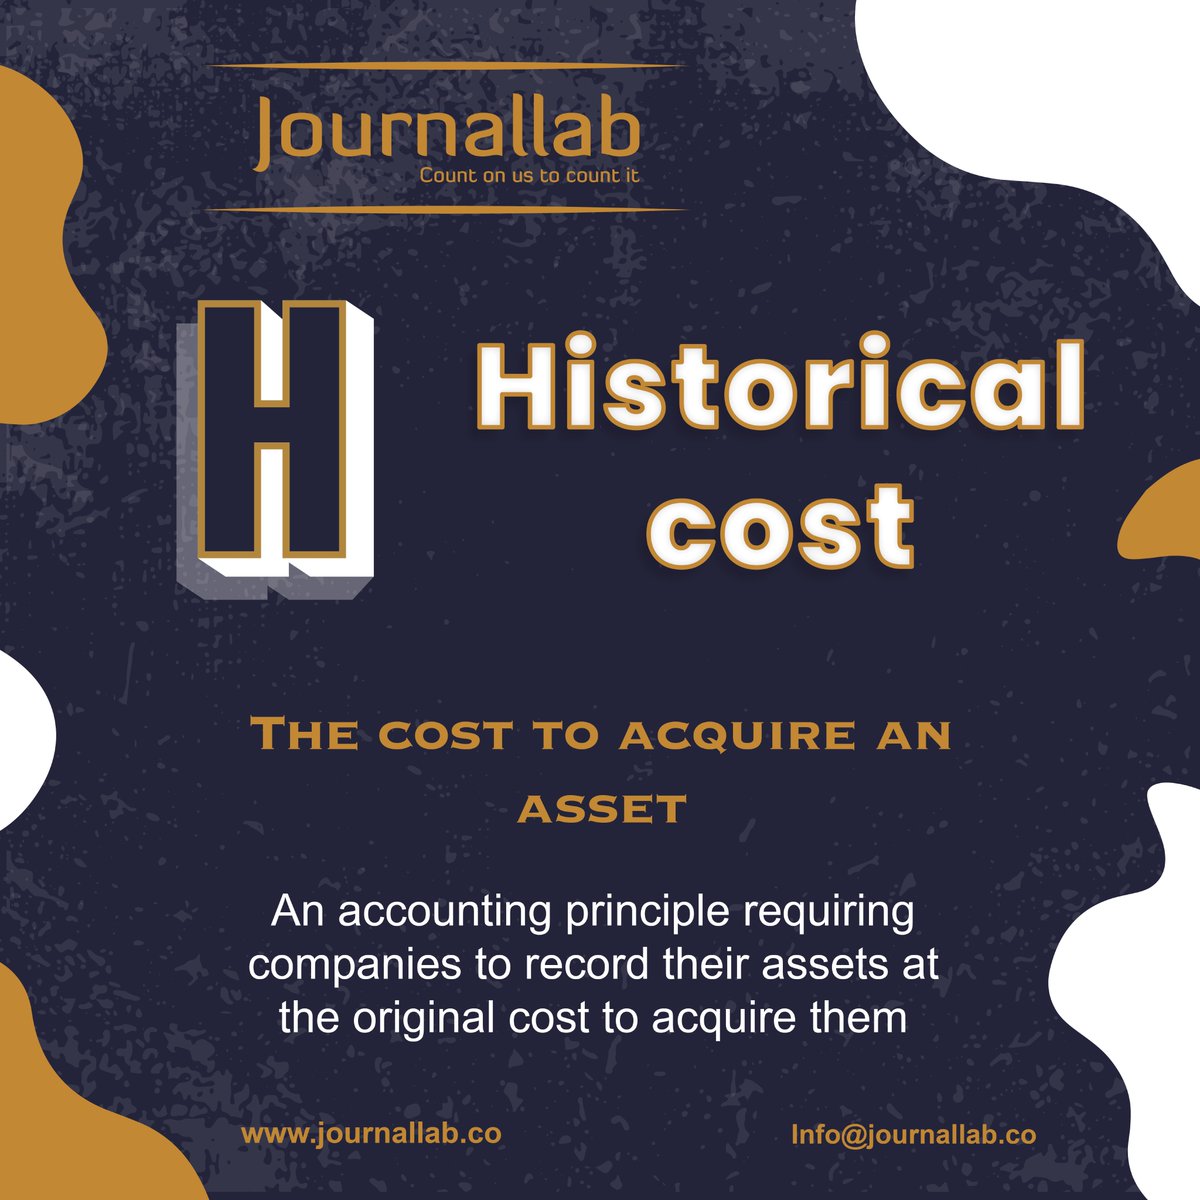 #historicalcost #bookkeeping #accounting #business #taxes #accountant #tax #payroll #finance #bookkeeper #accountingservices #businessowner #quickbooks #money #cpa #taxreturn #accountants #incometax #taxpreparer  #taxprofessional #taxplanning #audit #taxrefund #taxpreparation